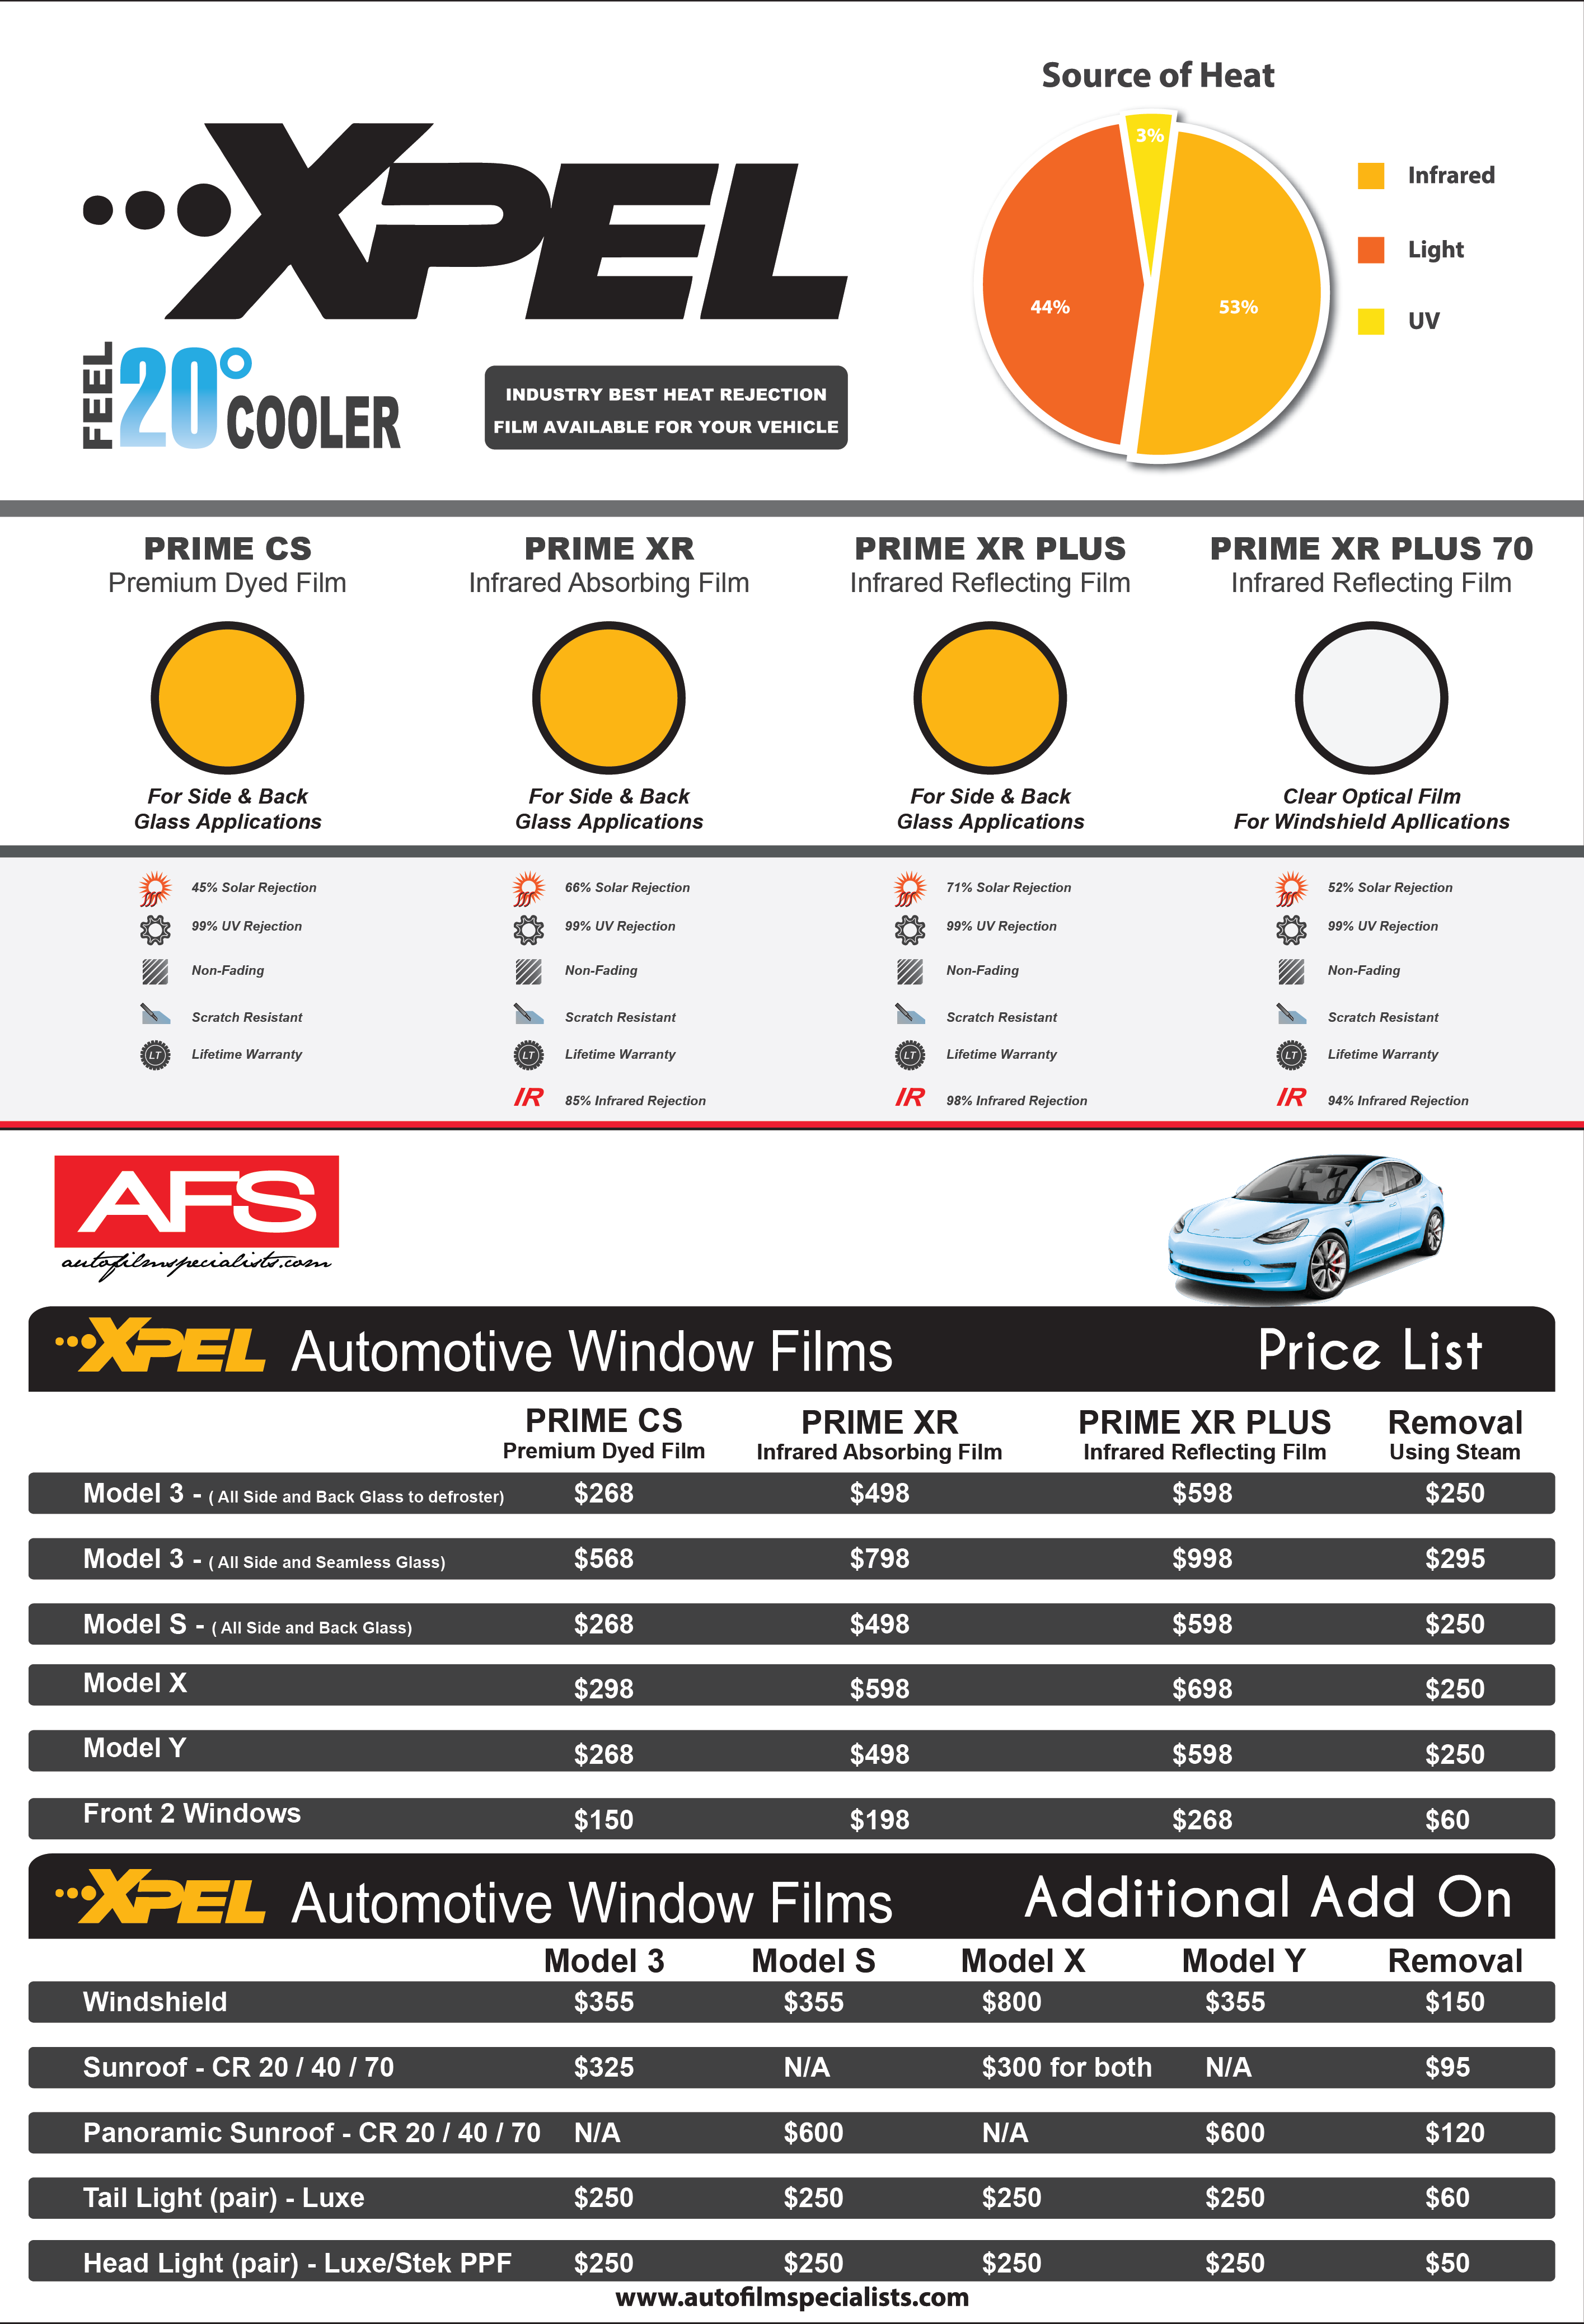 Car Window Tint Prices: How Make, Model & Factors Affect Cost